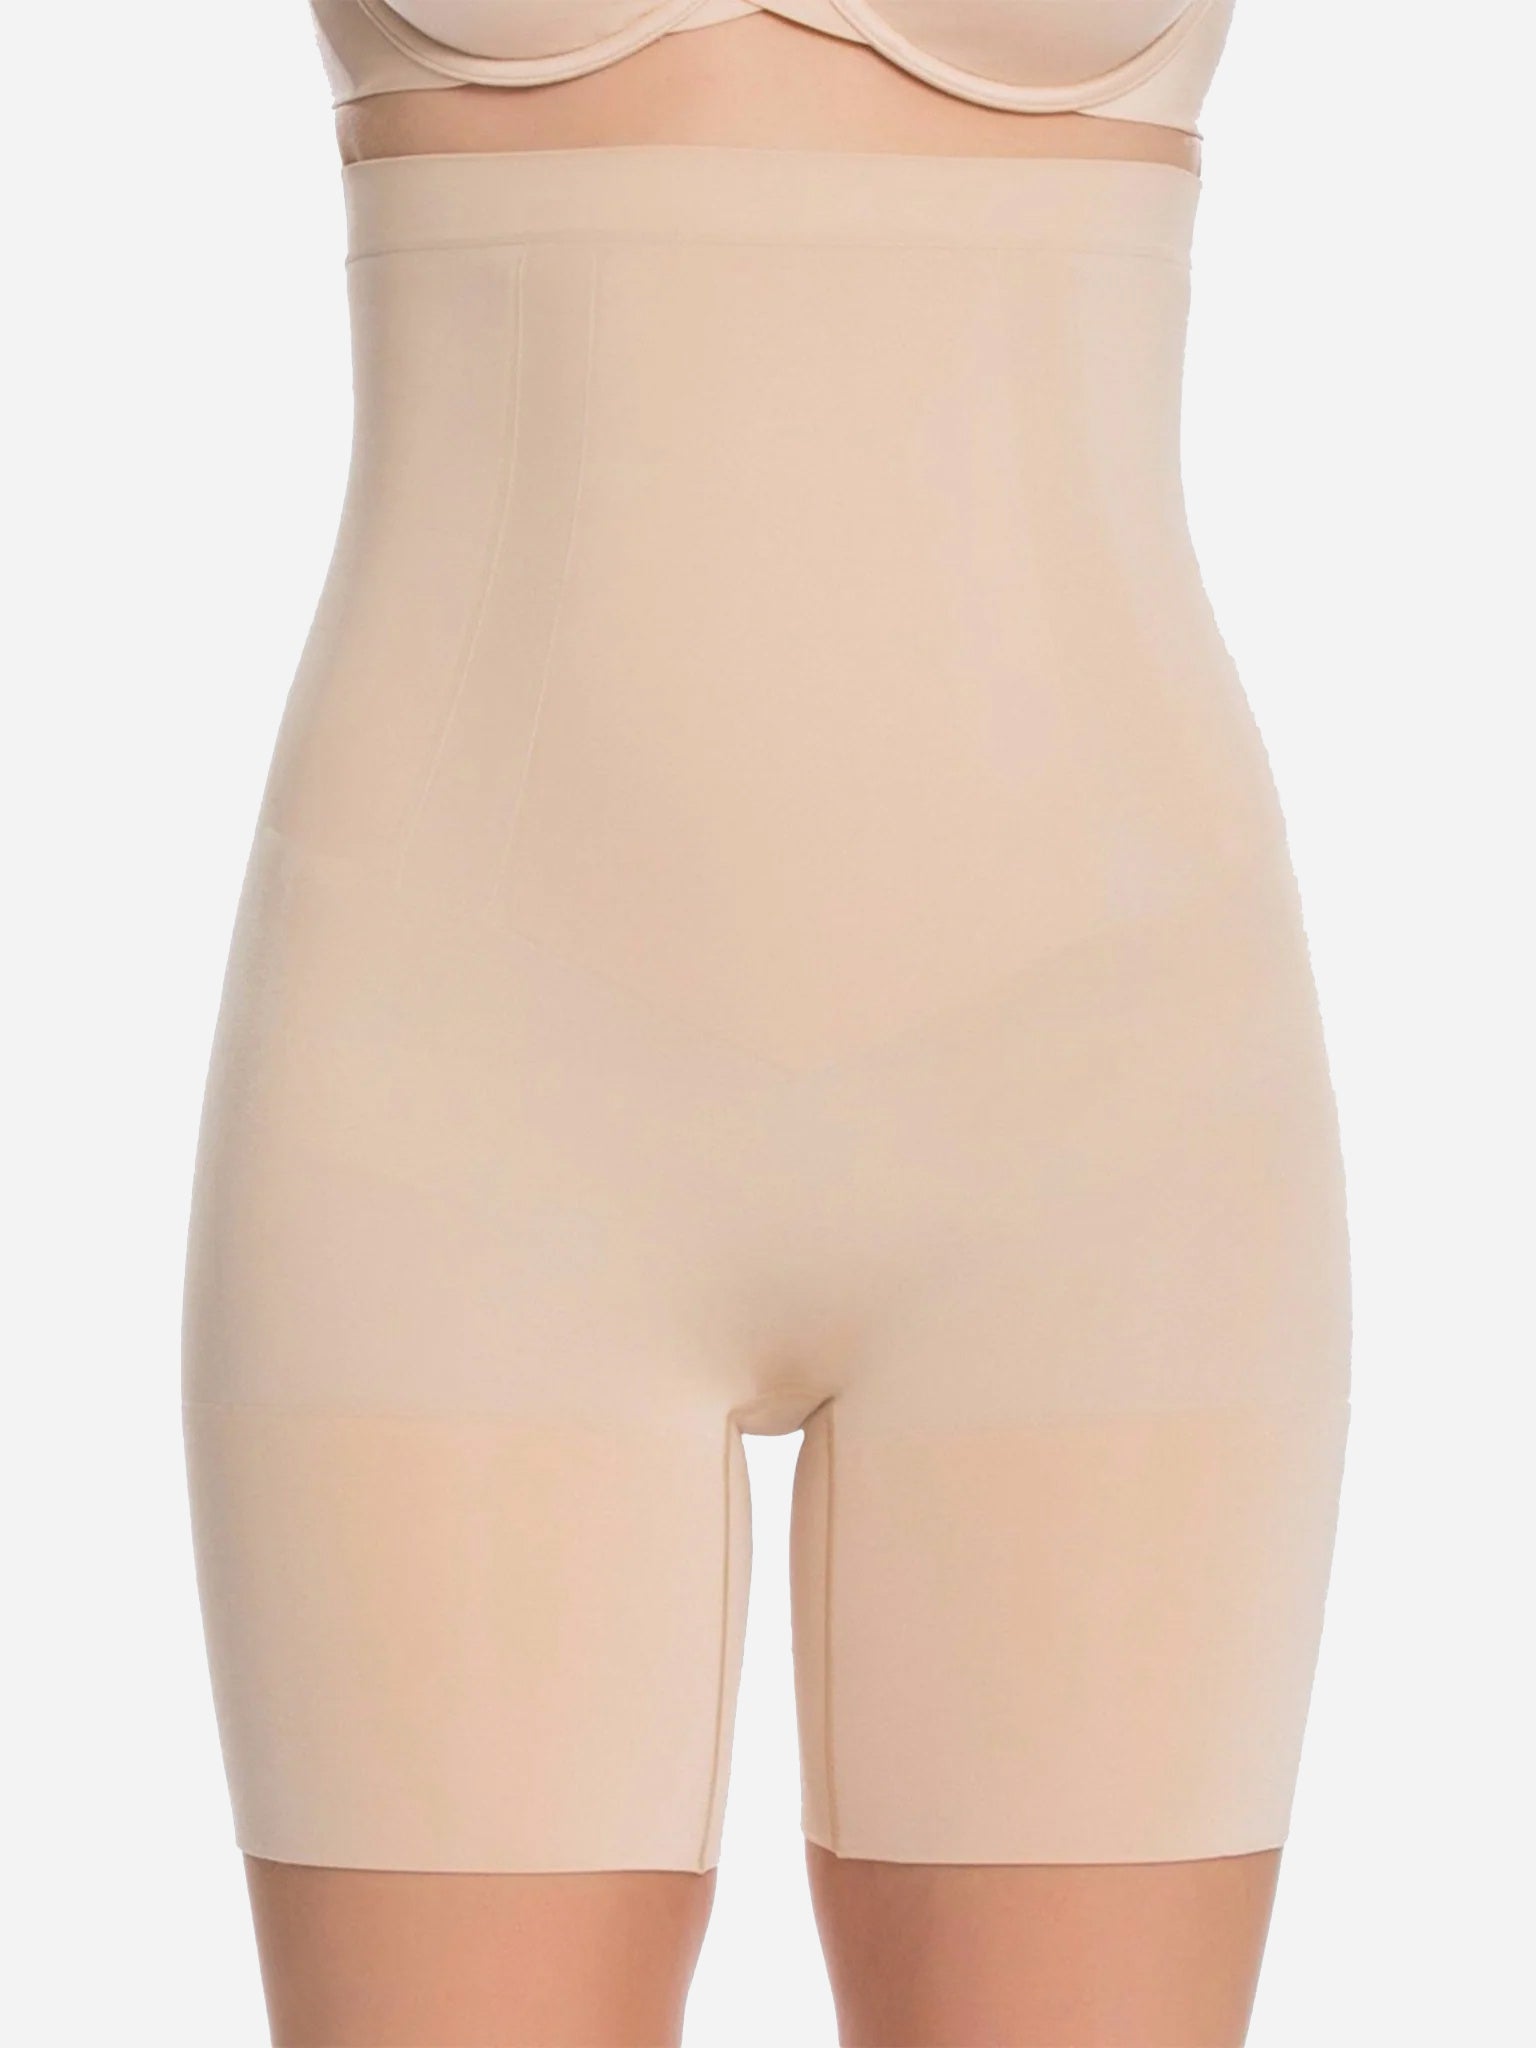 Spanx Women's Size S OnCore Mid-Thigh Bodysuit - Soft Nude